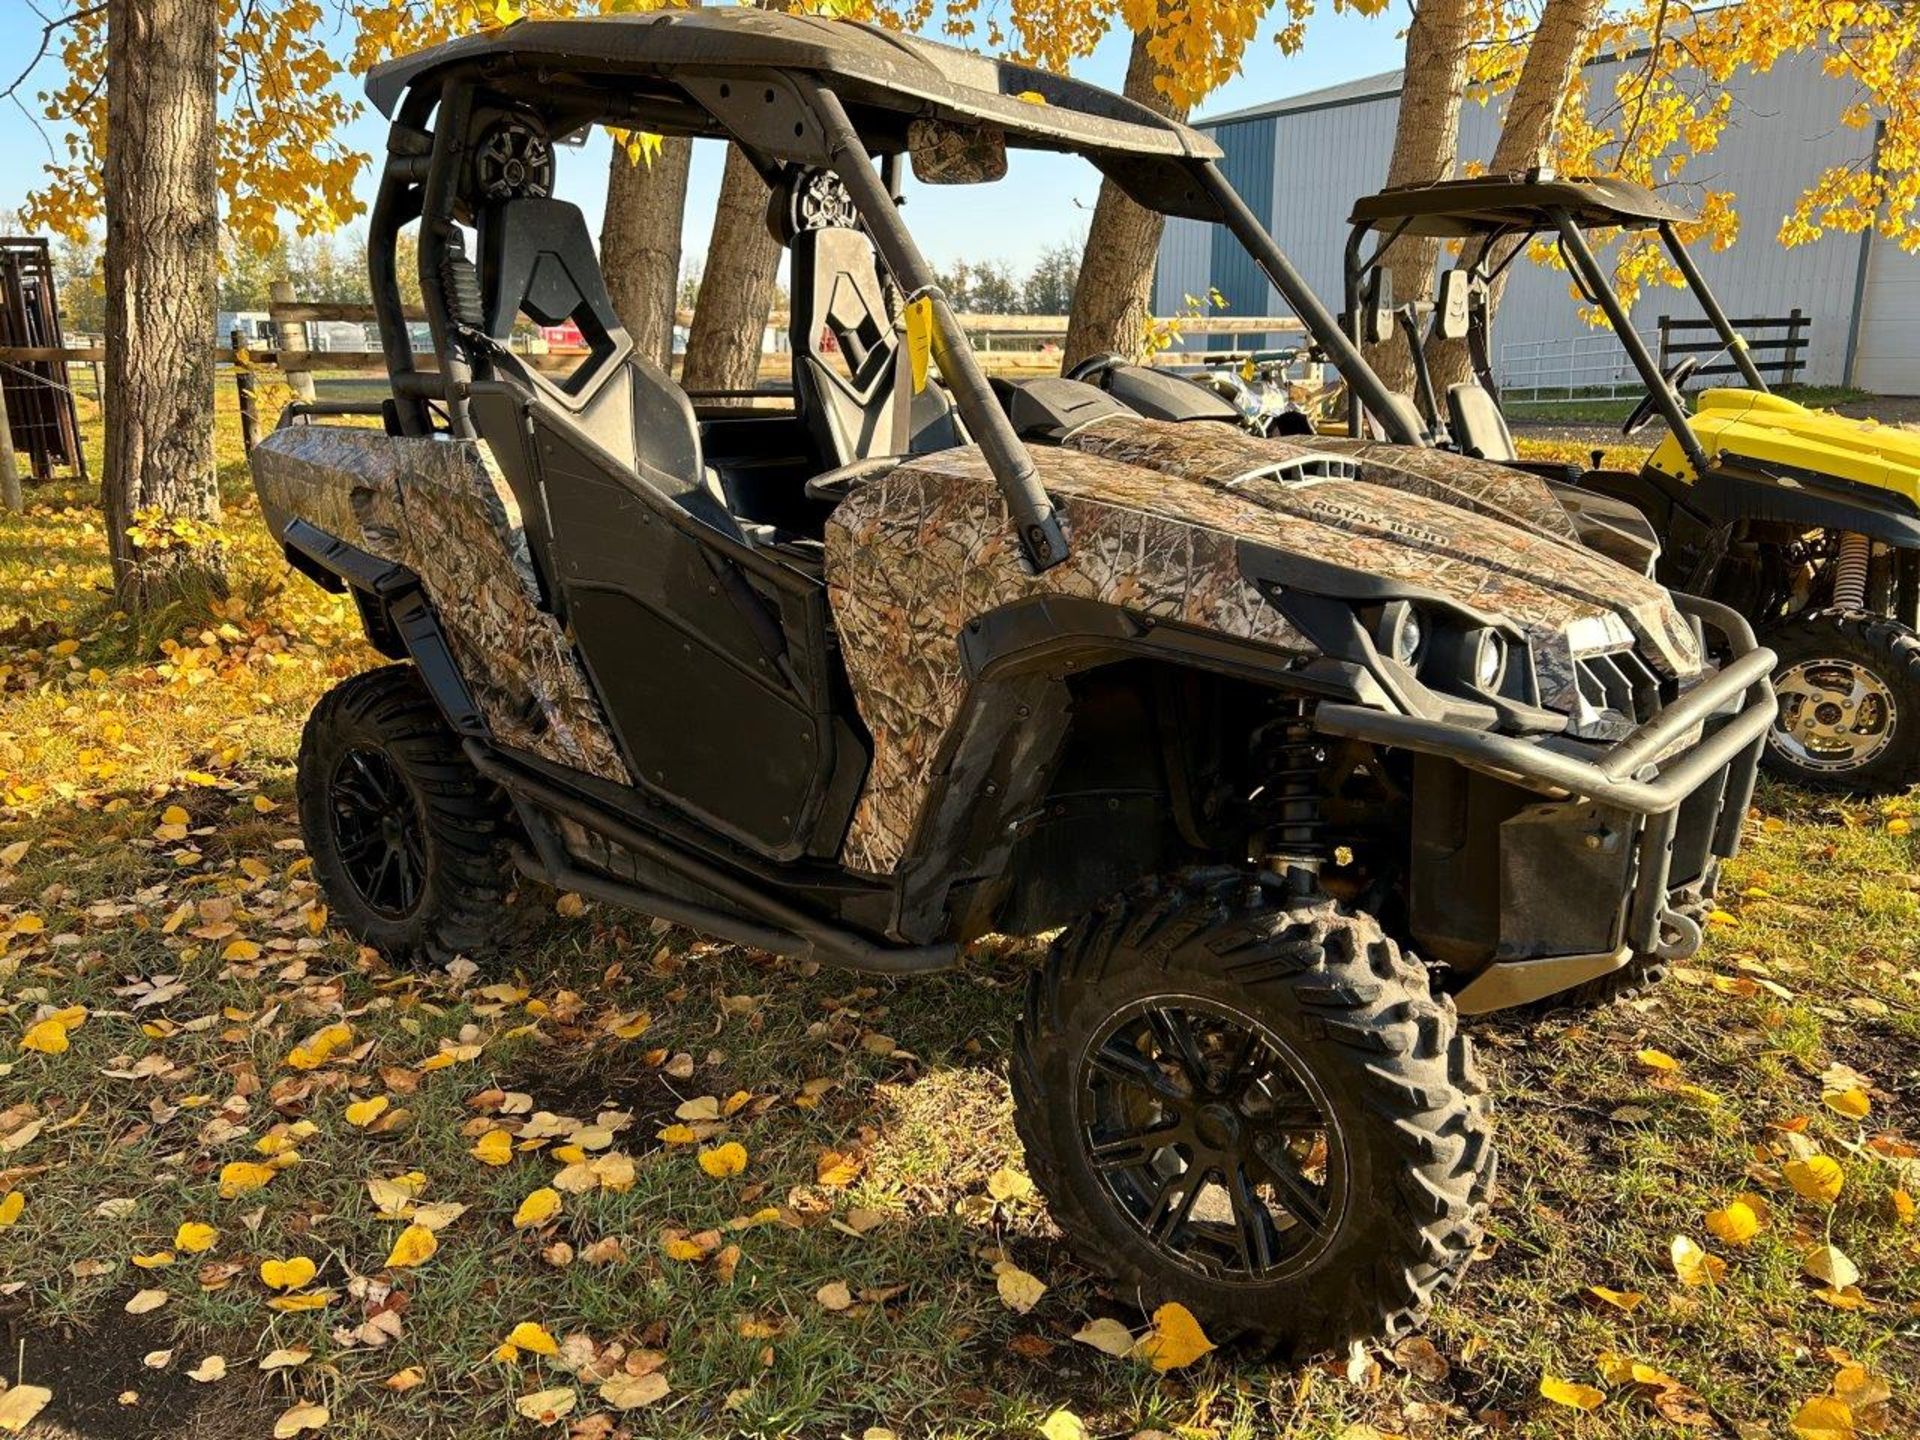 **LOCATED AT MAS** 2012 CAN AM COMMANDER XT ATV, 1000 CC, DUMP BOX, ROOF, NEW BRAKES, WHEEL BNGS, FU - Image 2 of 9